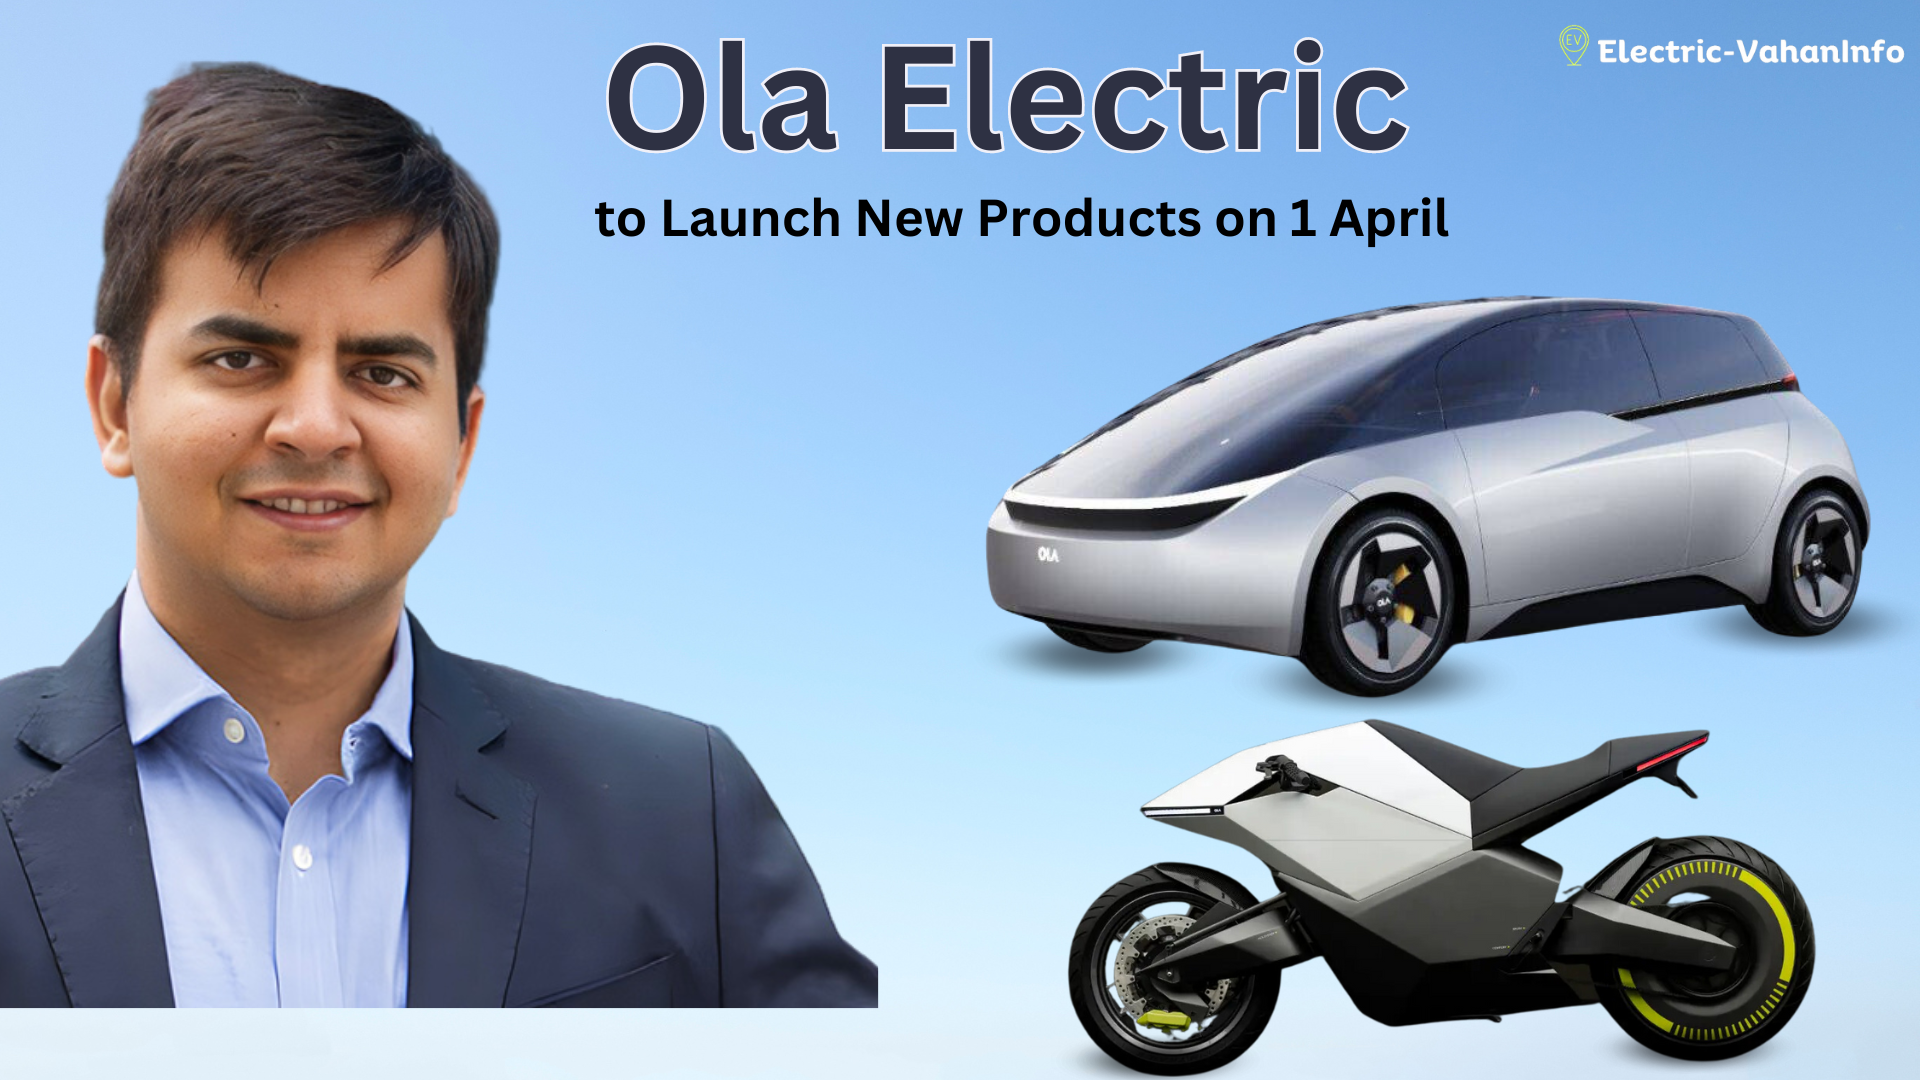 https://electric-vahaninfo.com/ola-electric-to-launch-new-products-on-monday-april-1-confirm-bhavish-aggarwal/